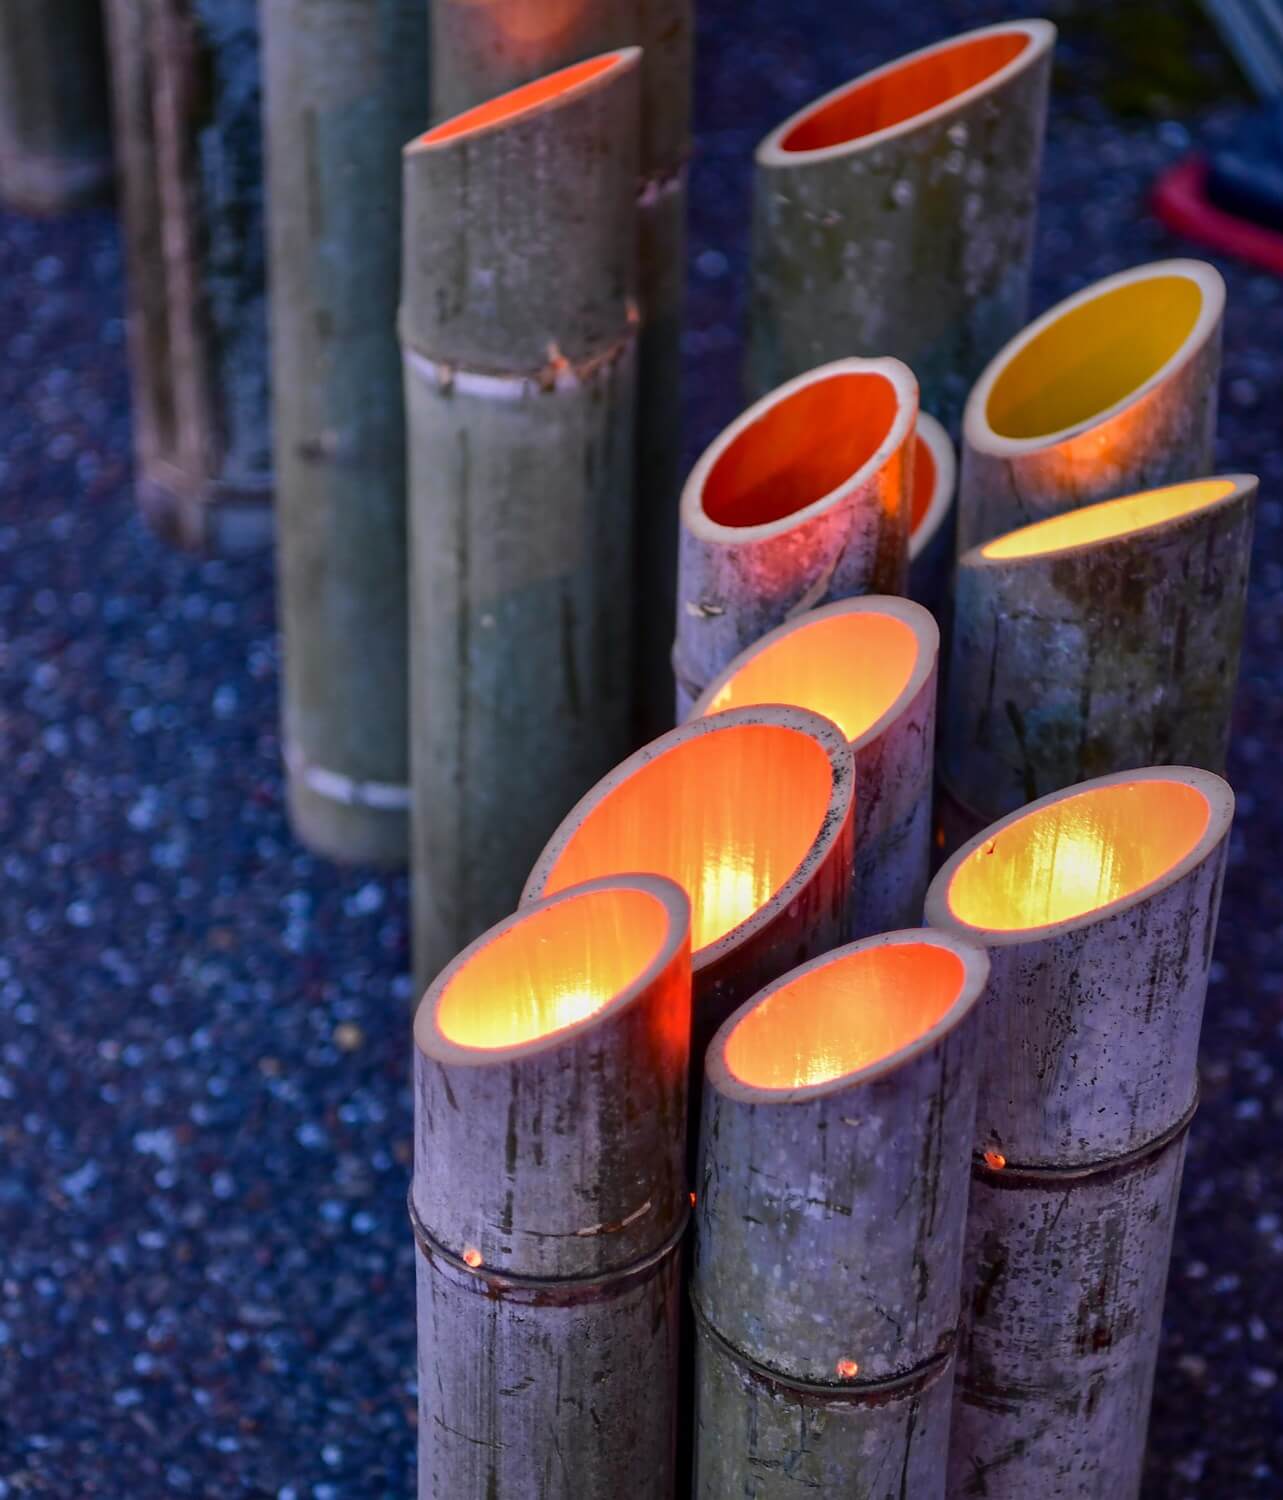 There are various illuminations using bamboo = Shutterstock